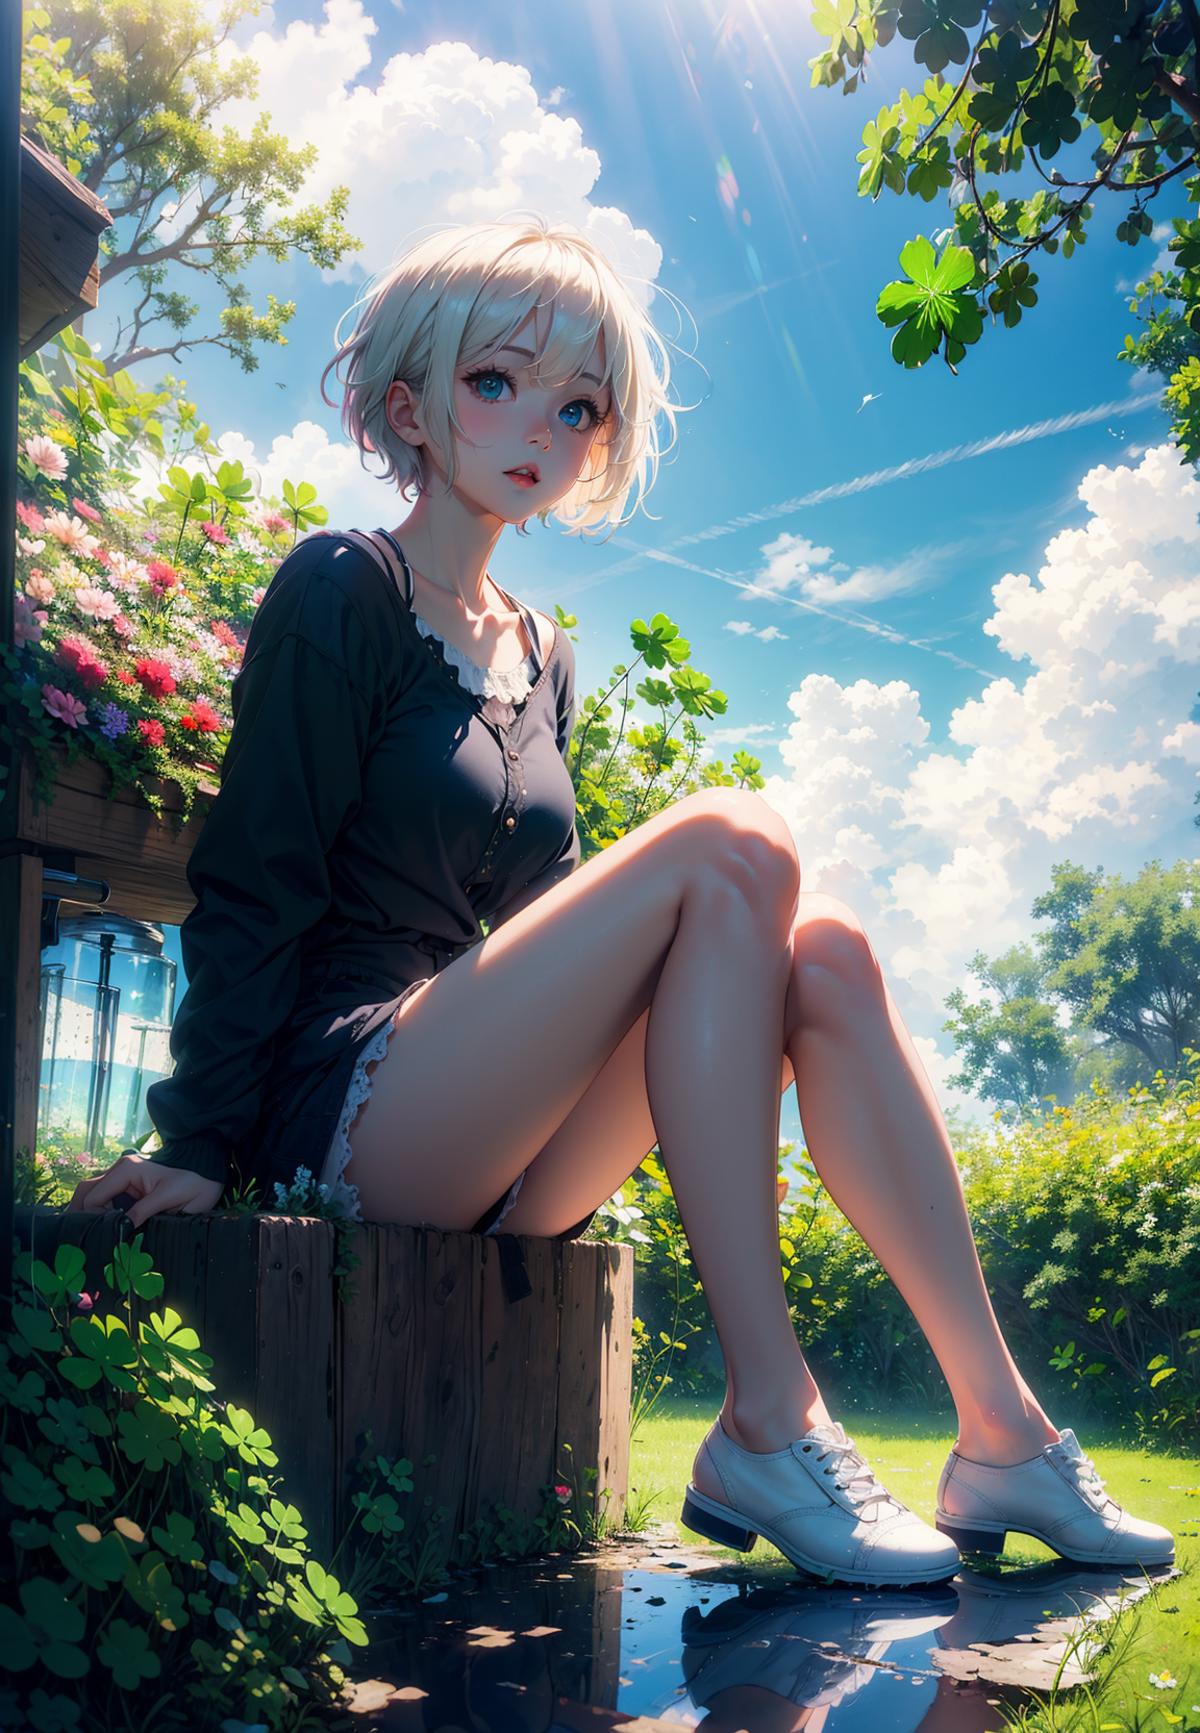 A beautiful woman sitting on a log in a garden.